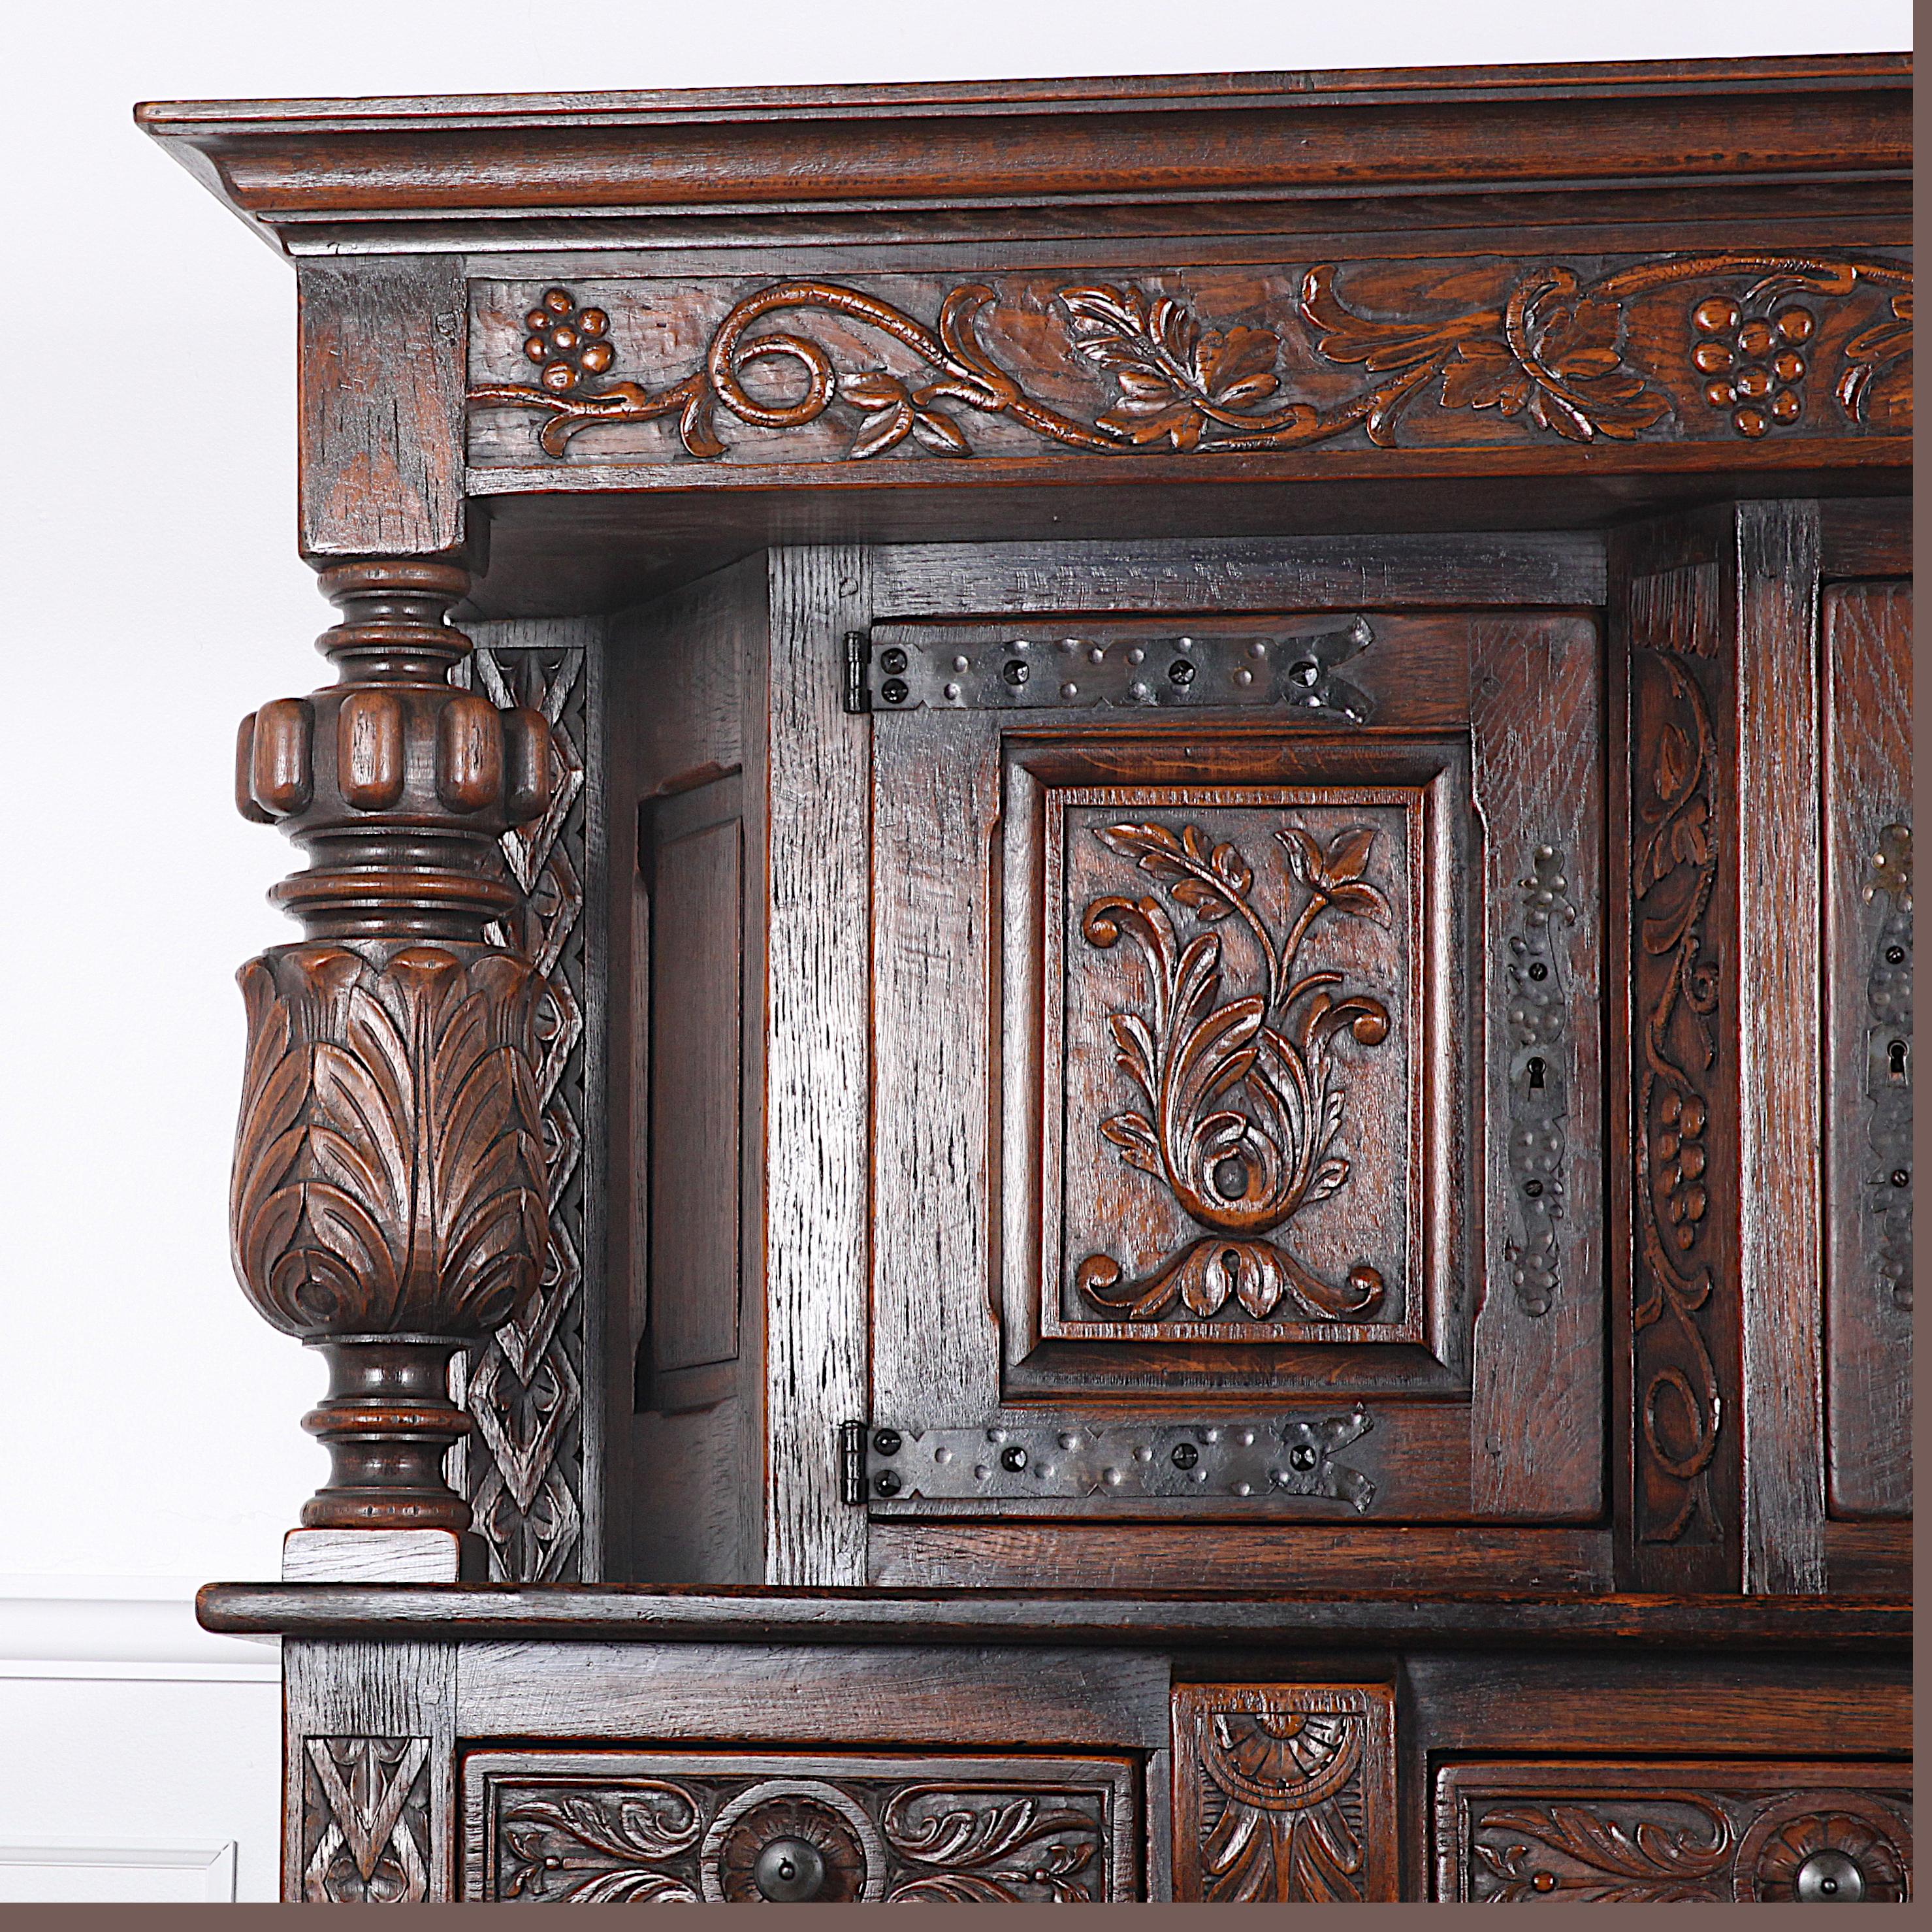  A heavily-carved solid oak Flemish court cupboard with three carved paneled upper doors over a lower cabinet with three drawers and two double-hinged carved cupboard doors. Large turned and carved columns flanking the top cabinets.